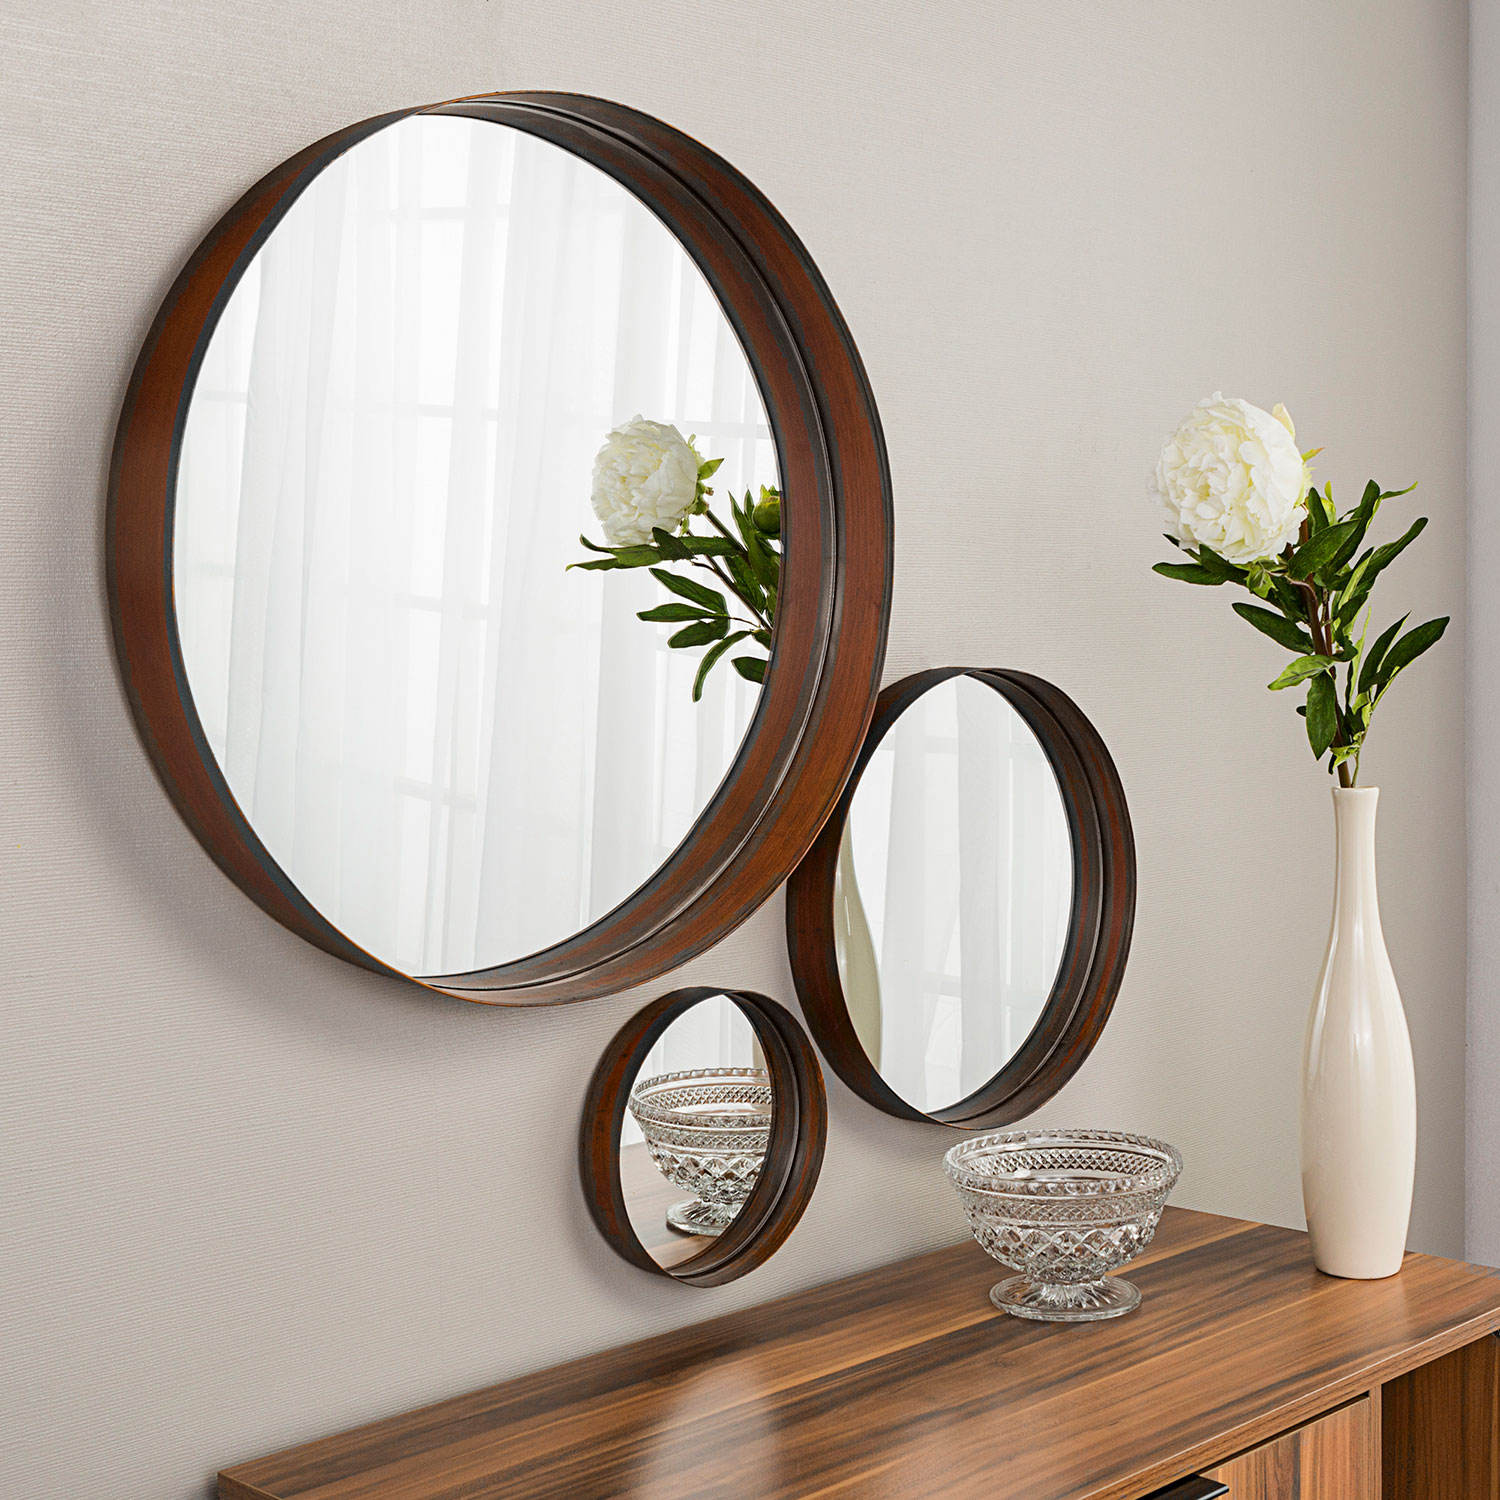 Mirror Sets Category